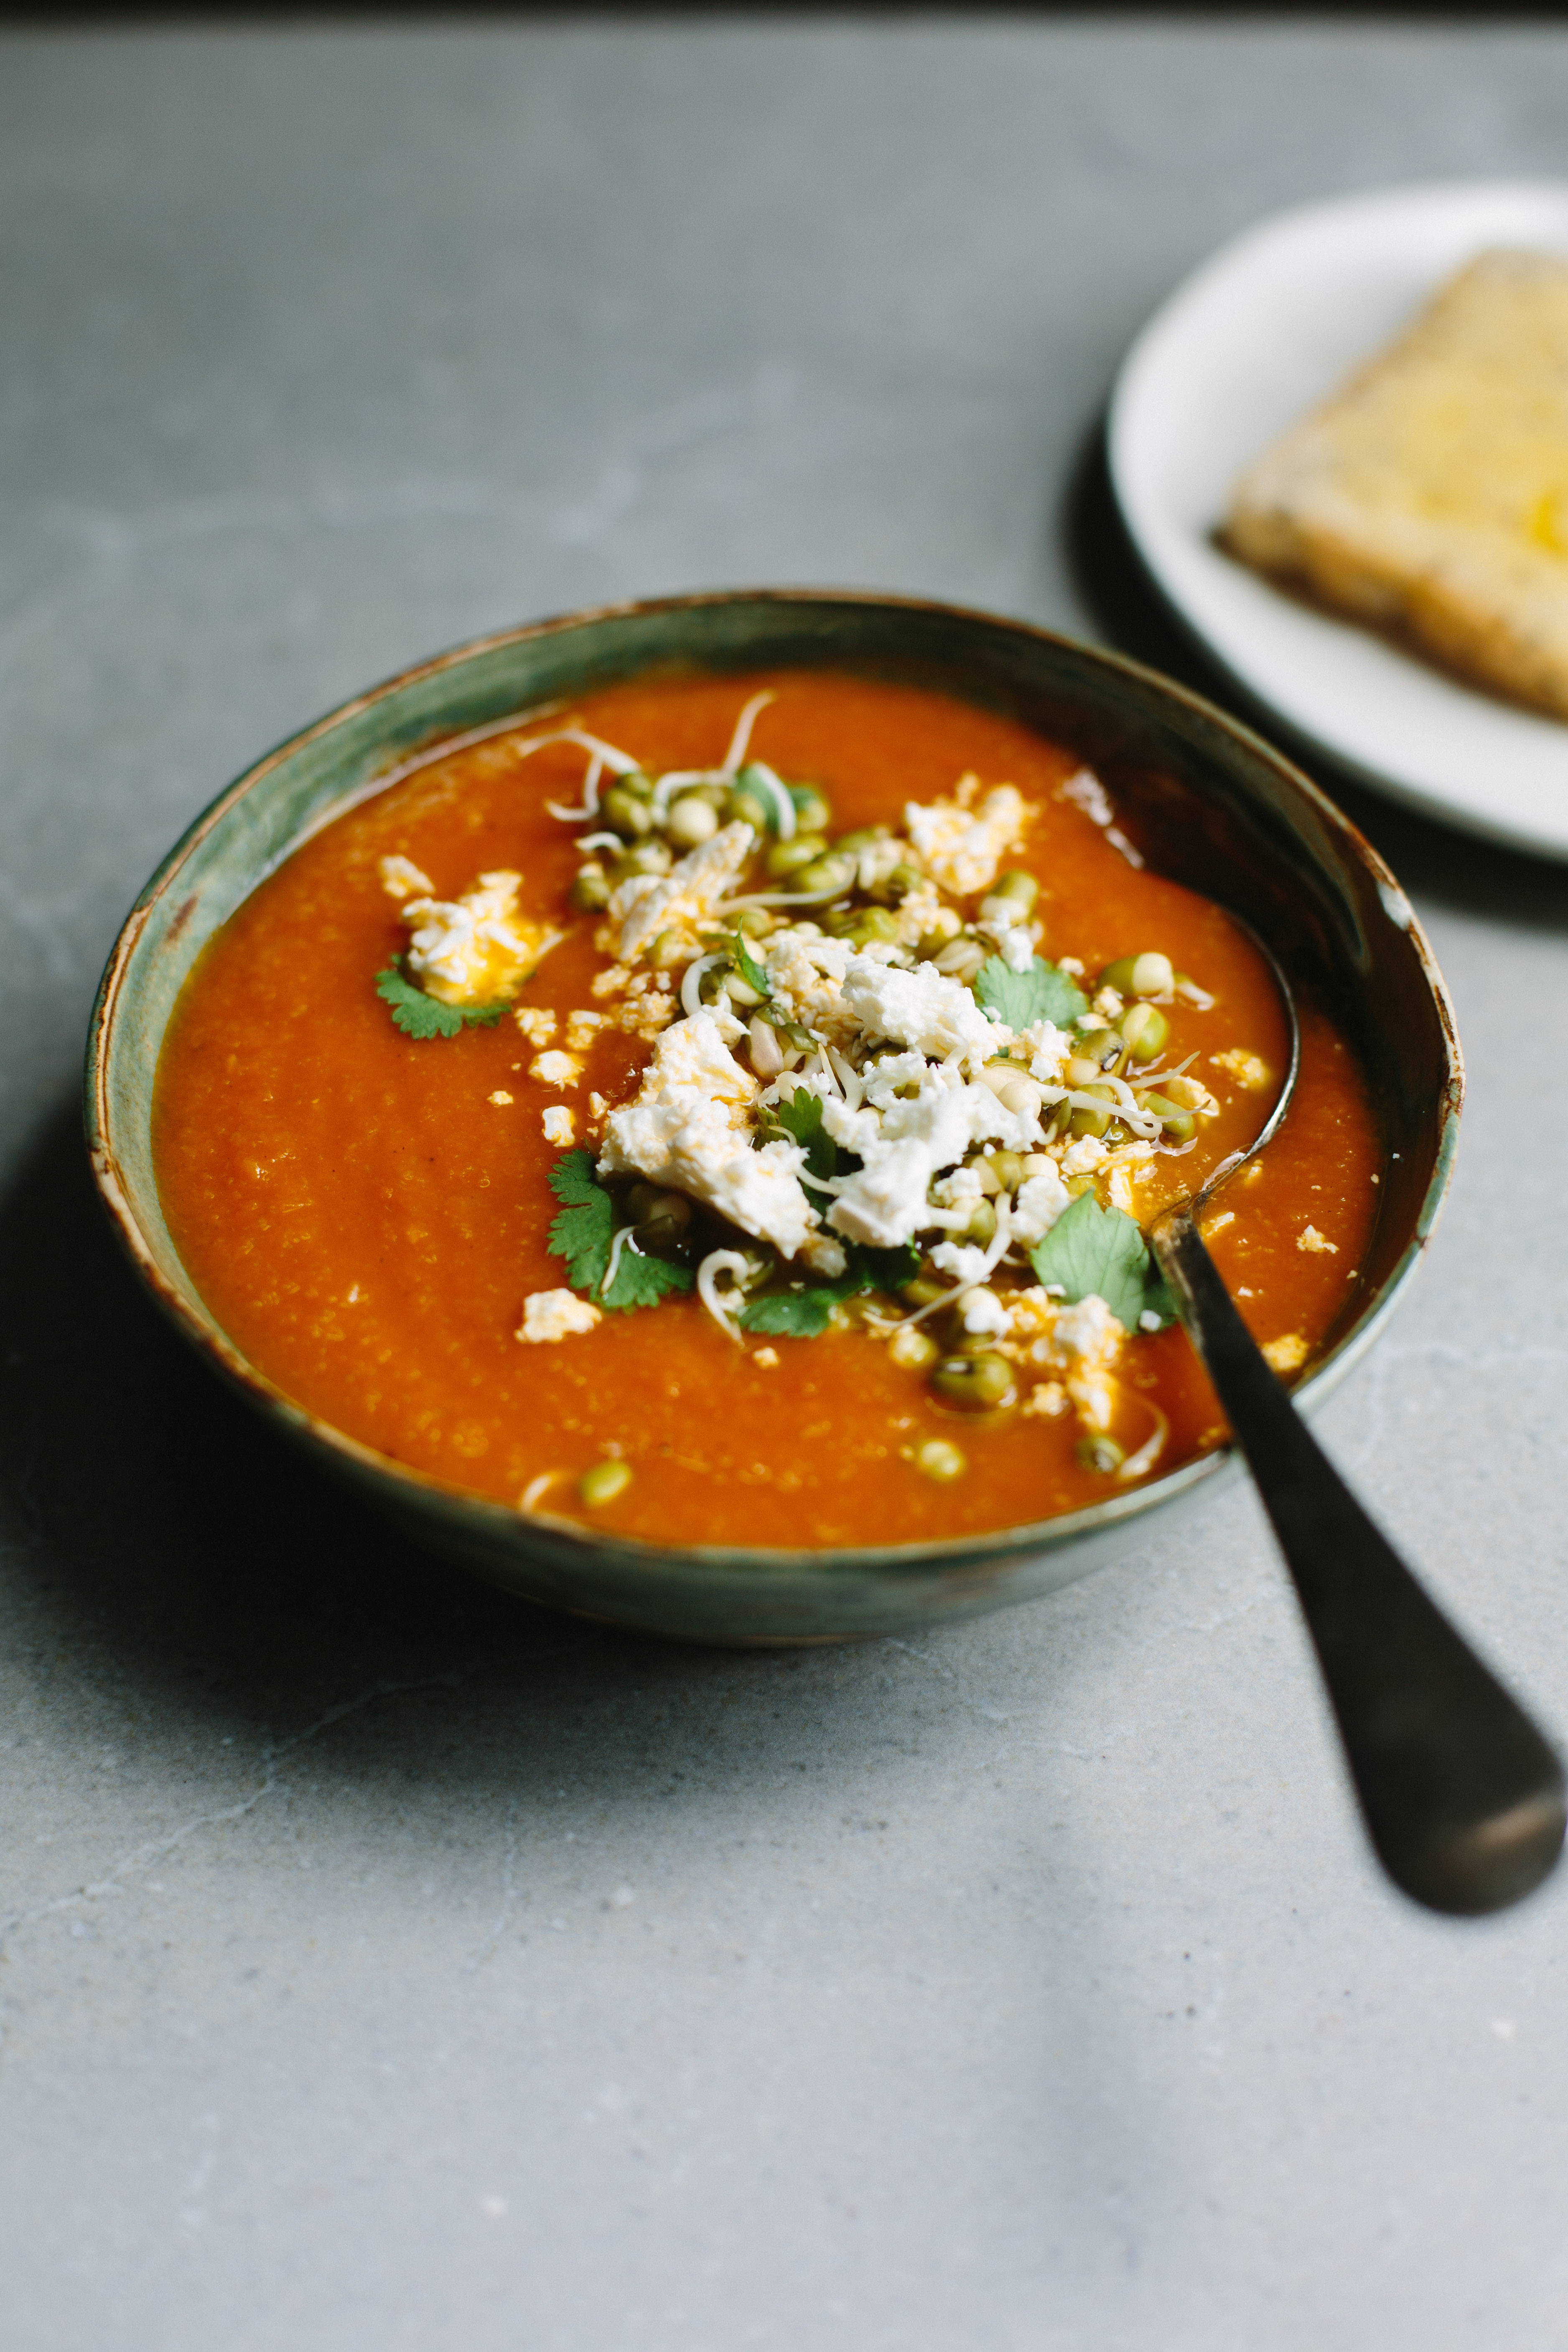 Curried carrot + red lentil soup with mung beans + feta | My Darling Lemon Thyme